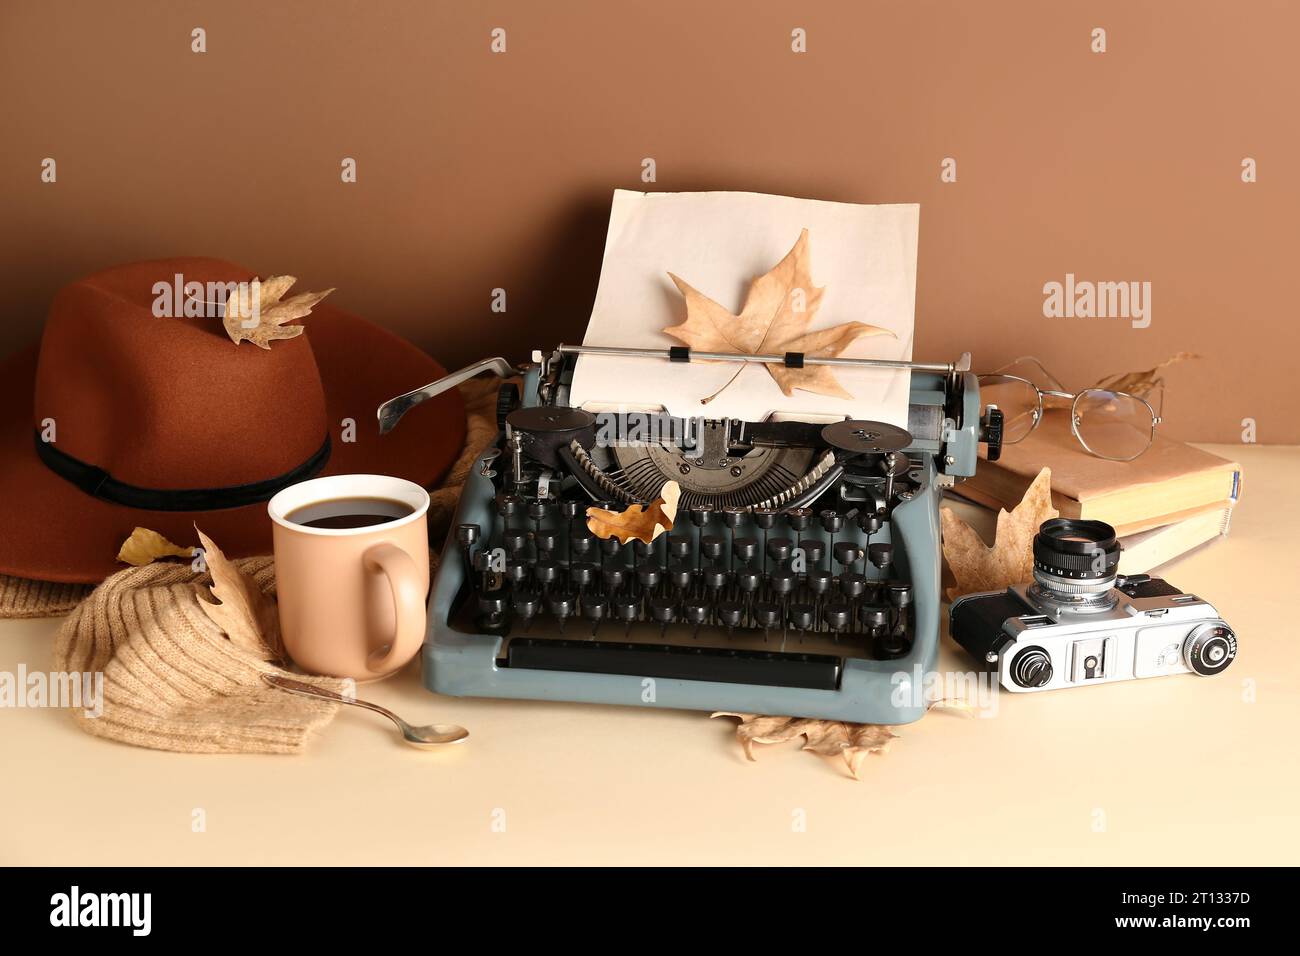 https://c8.alamy.com/comp/2T1337D/vintage-typewriter-hat-books-photo-camera-cup-of-coffee-eyeglasses-and-autumn-leaves-on-brown-background-2T1337D.jpg